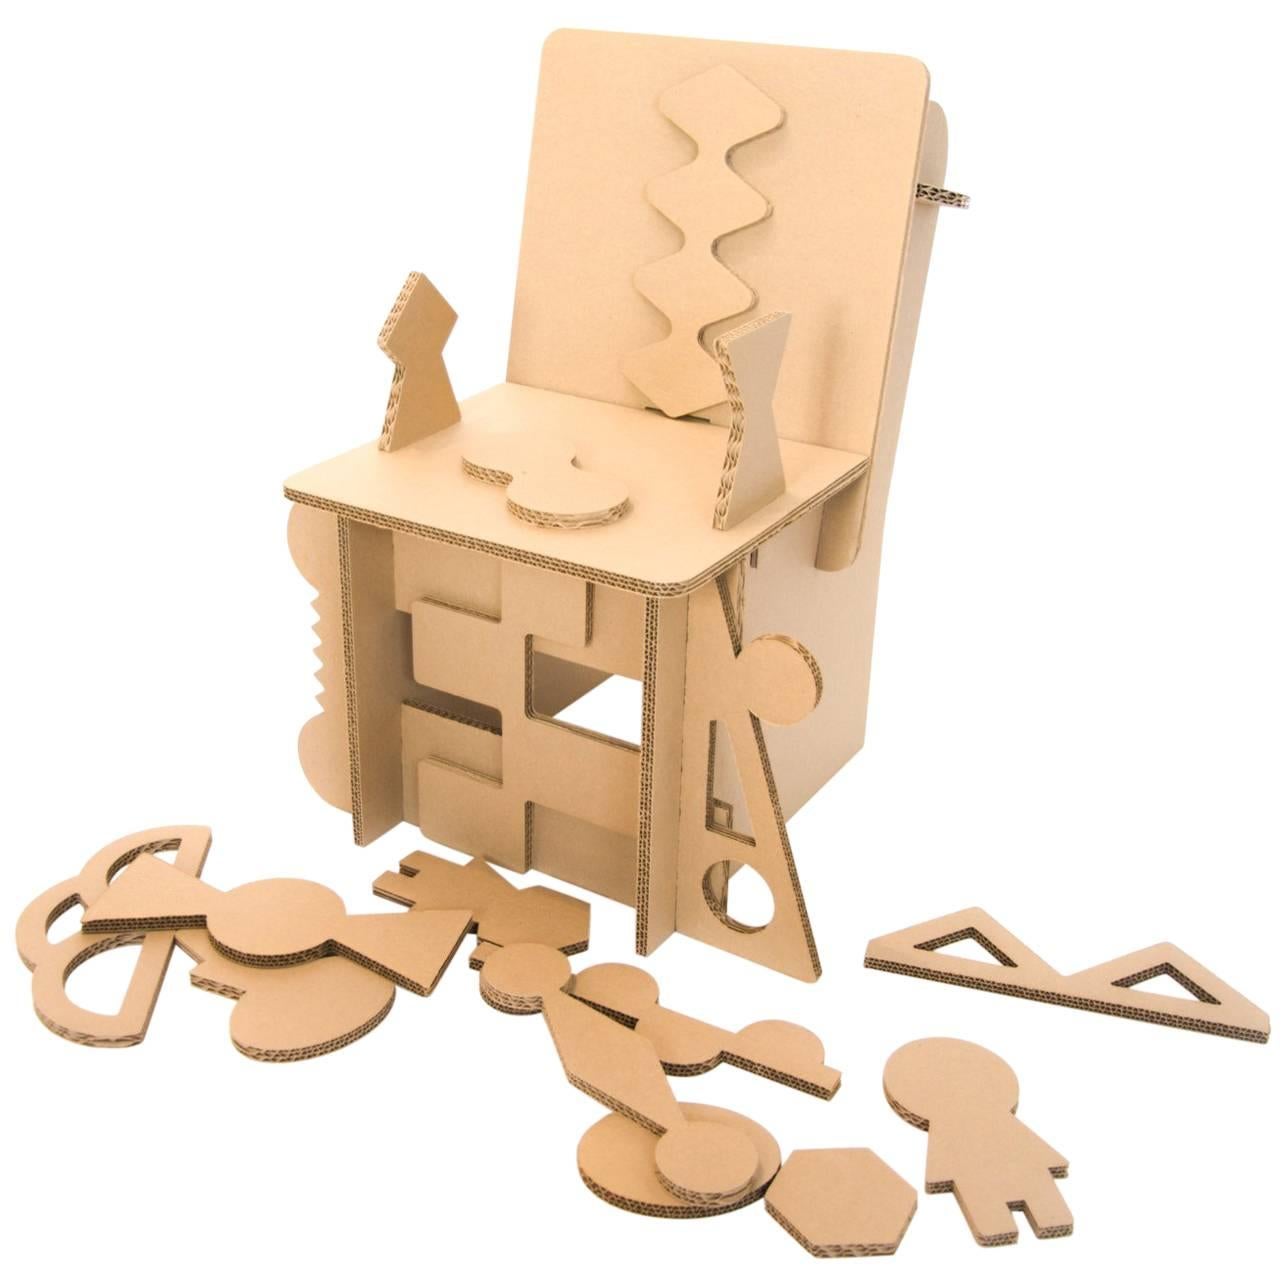 Cardboard Chair by Mixed Nuts' Crazy Crazy for the Denver Art Museum im Angebot